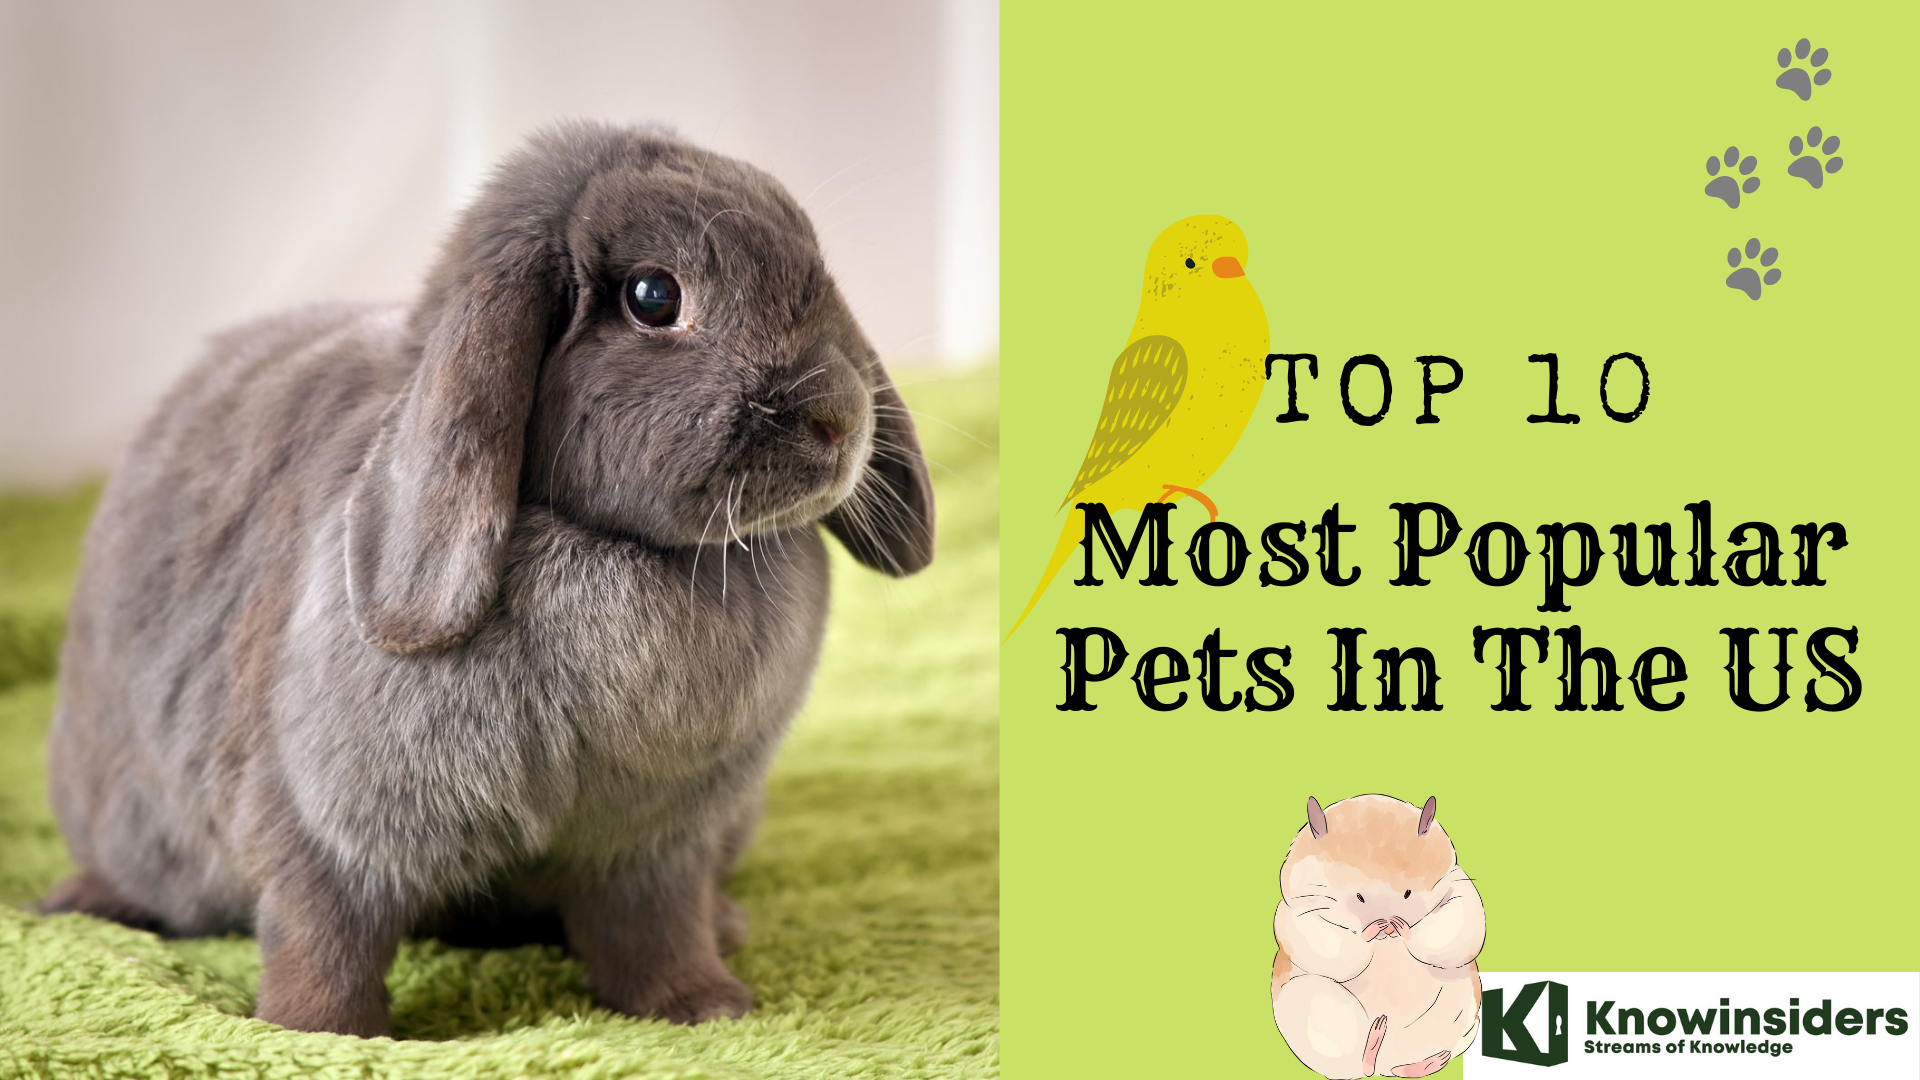 Top 10 most popular pets in the US 